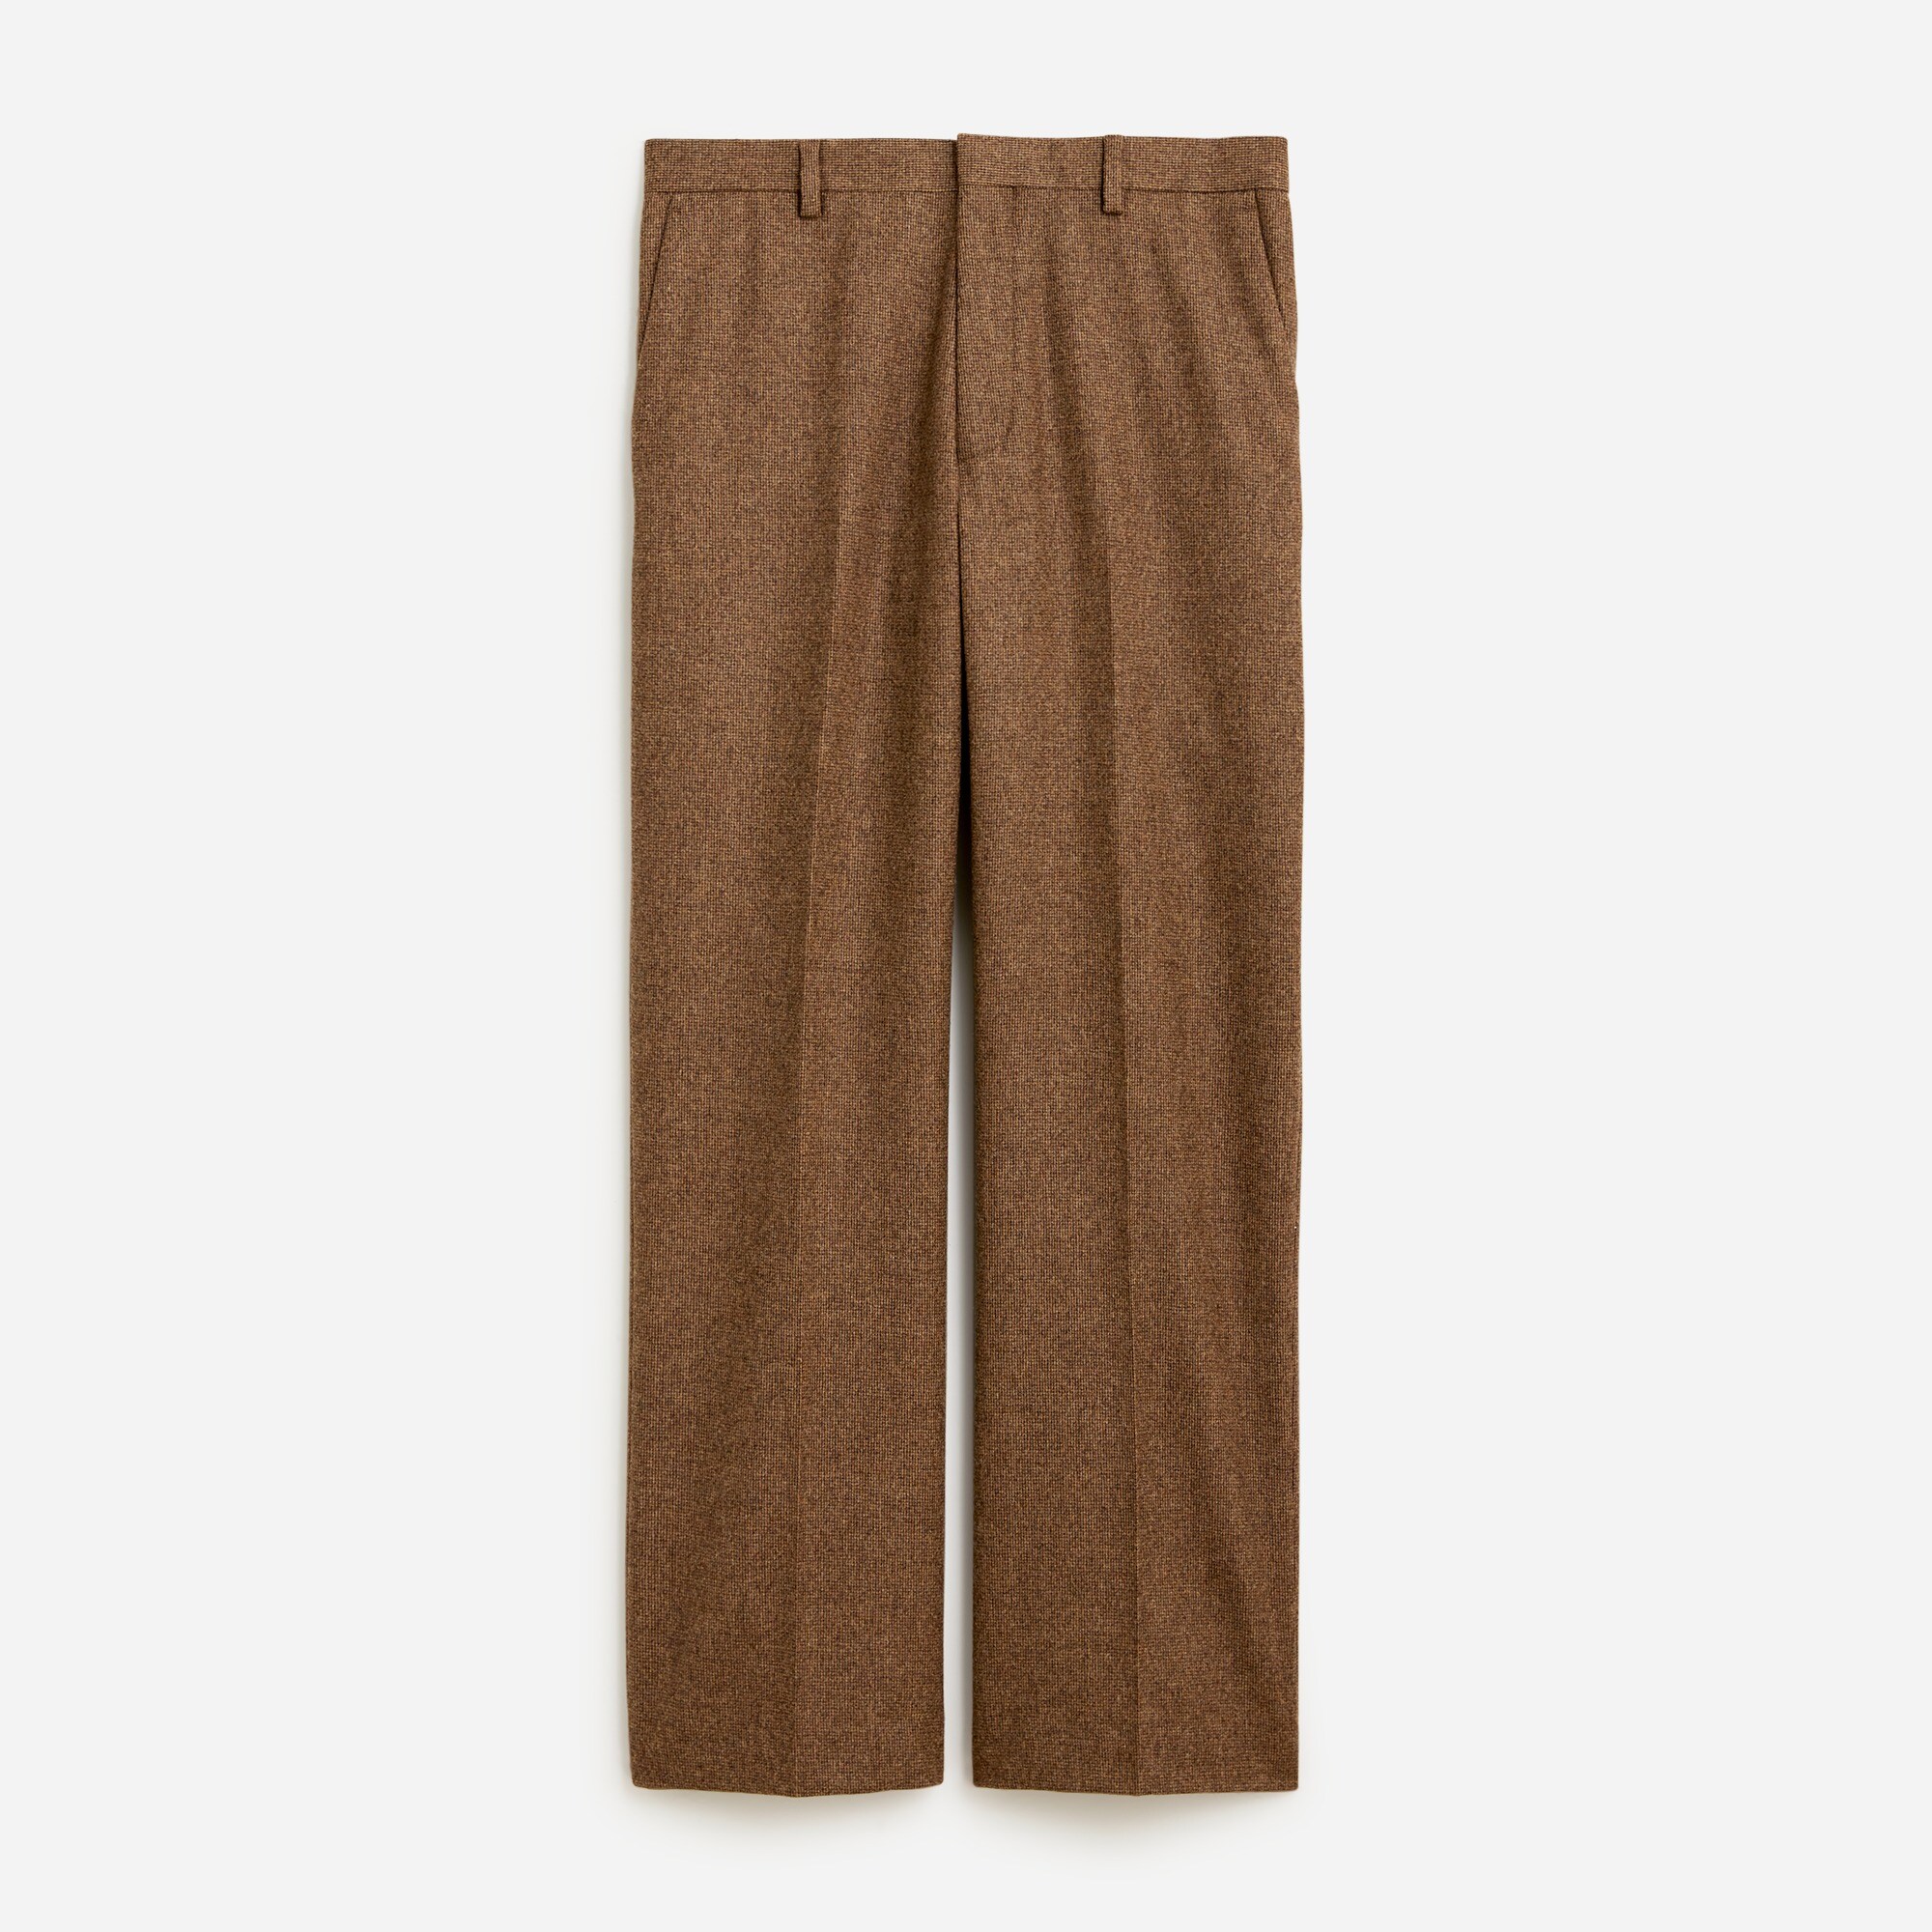  Suit pant in Scottish lambswool flannel